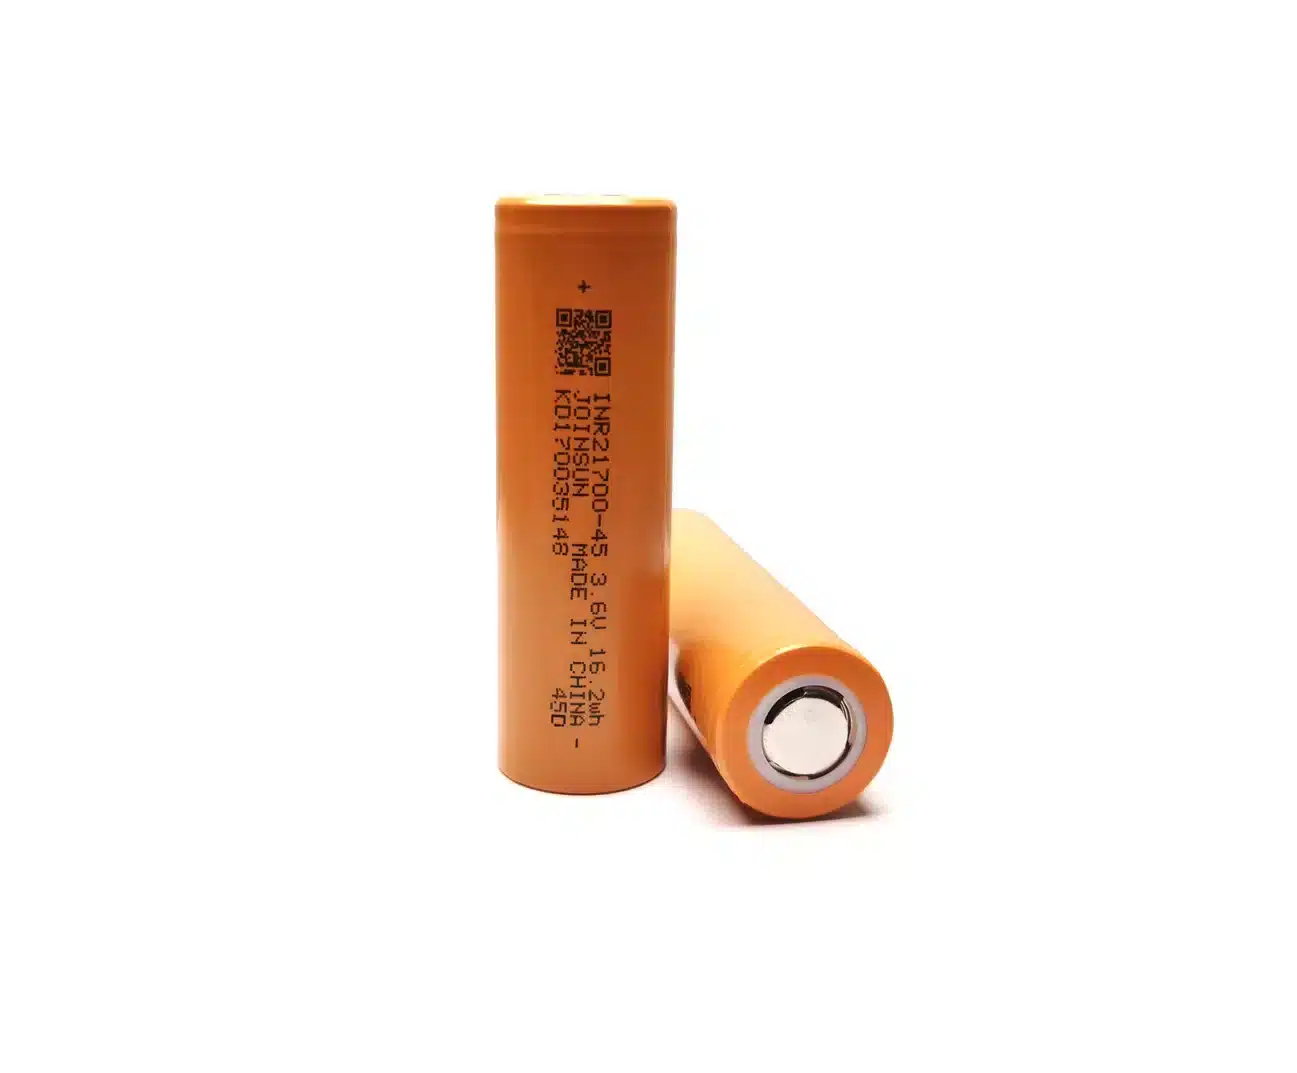 Joinsun 21700 Battery Cells, JOINSUN and Redway Group